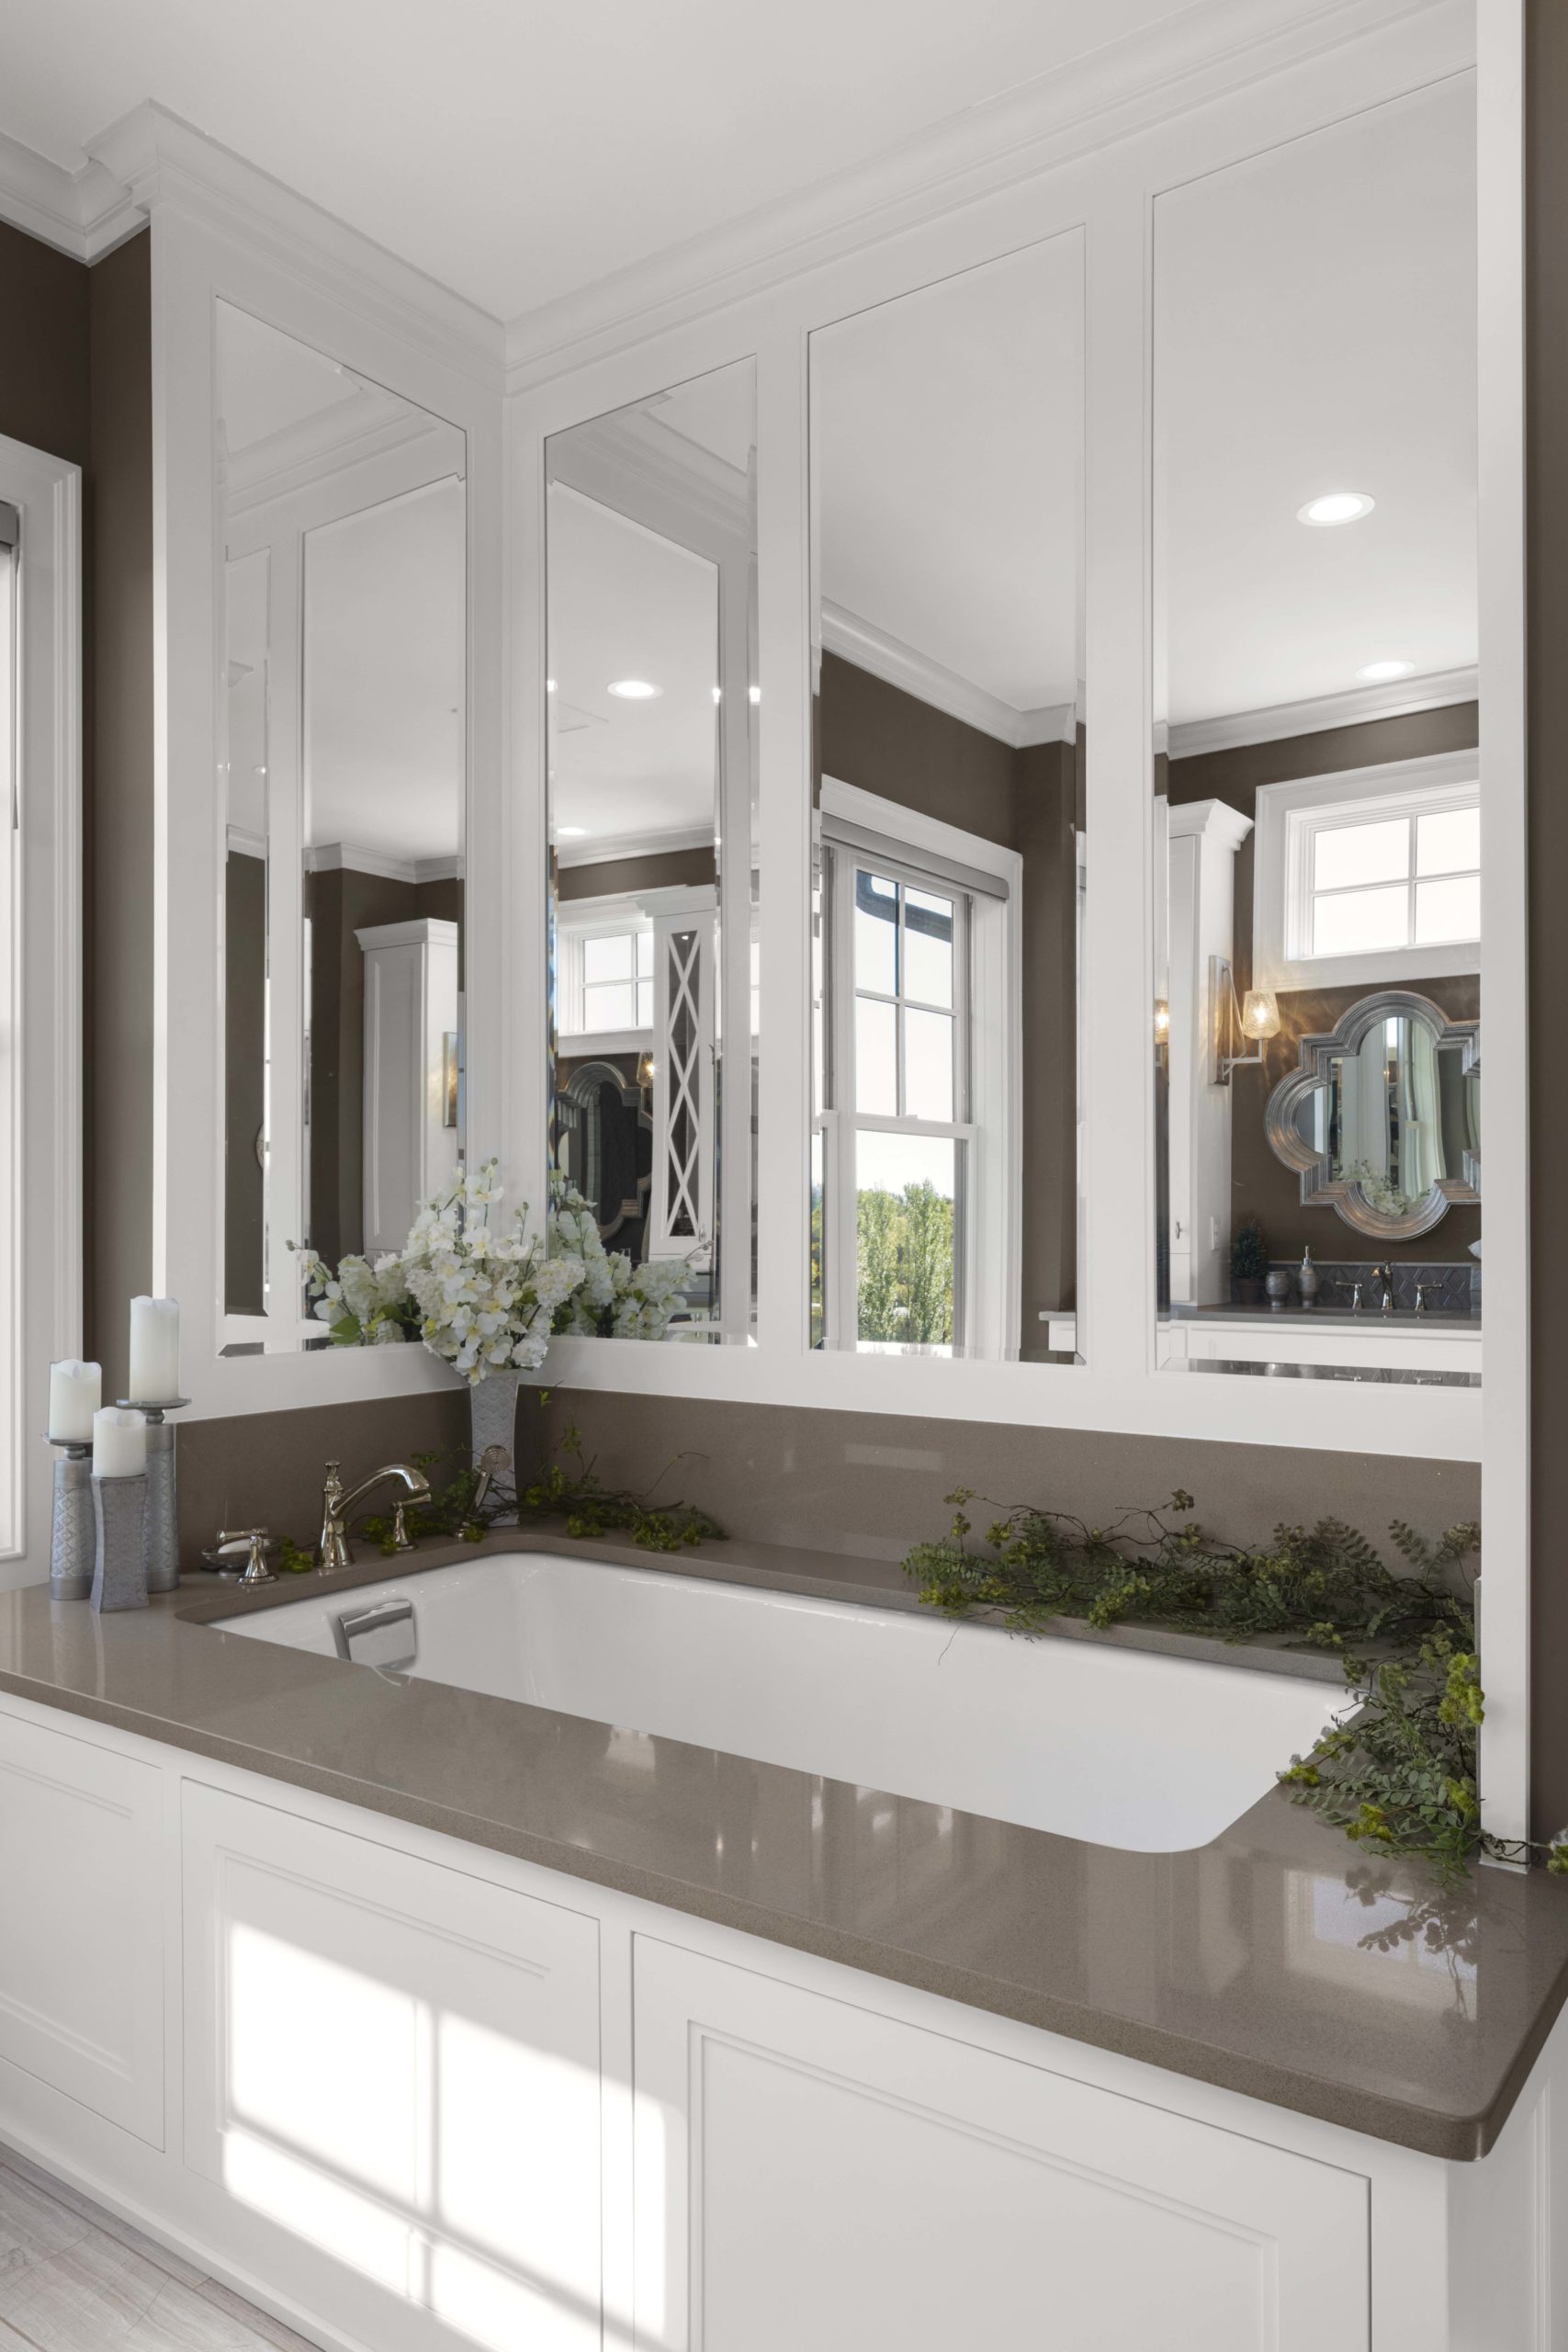 A prairie-style bathroom with a large tub and mirrors in a custom home.